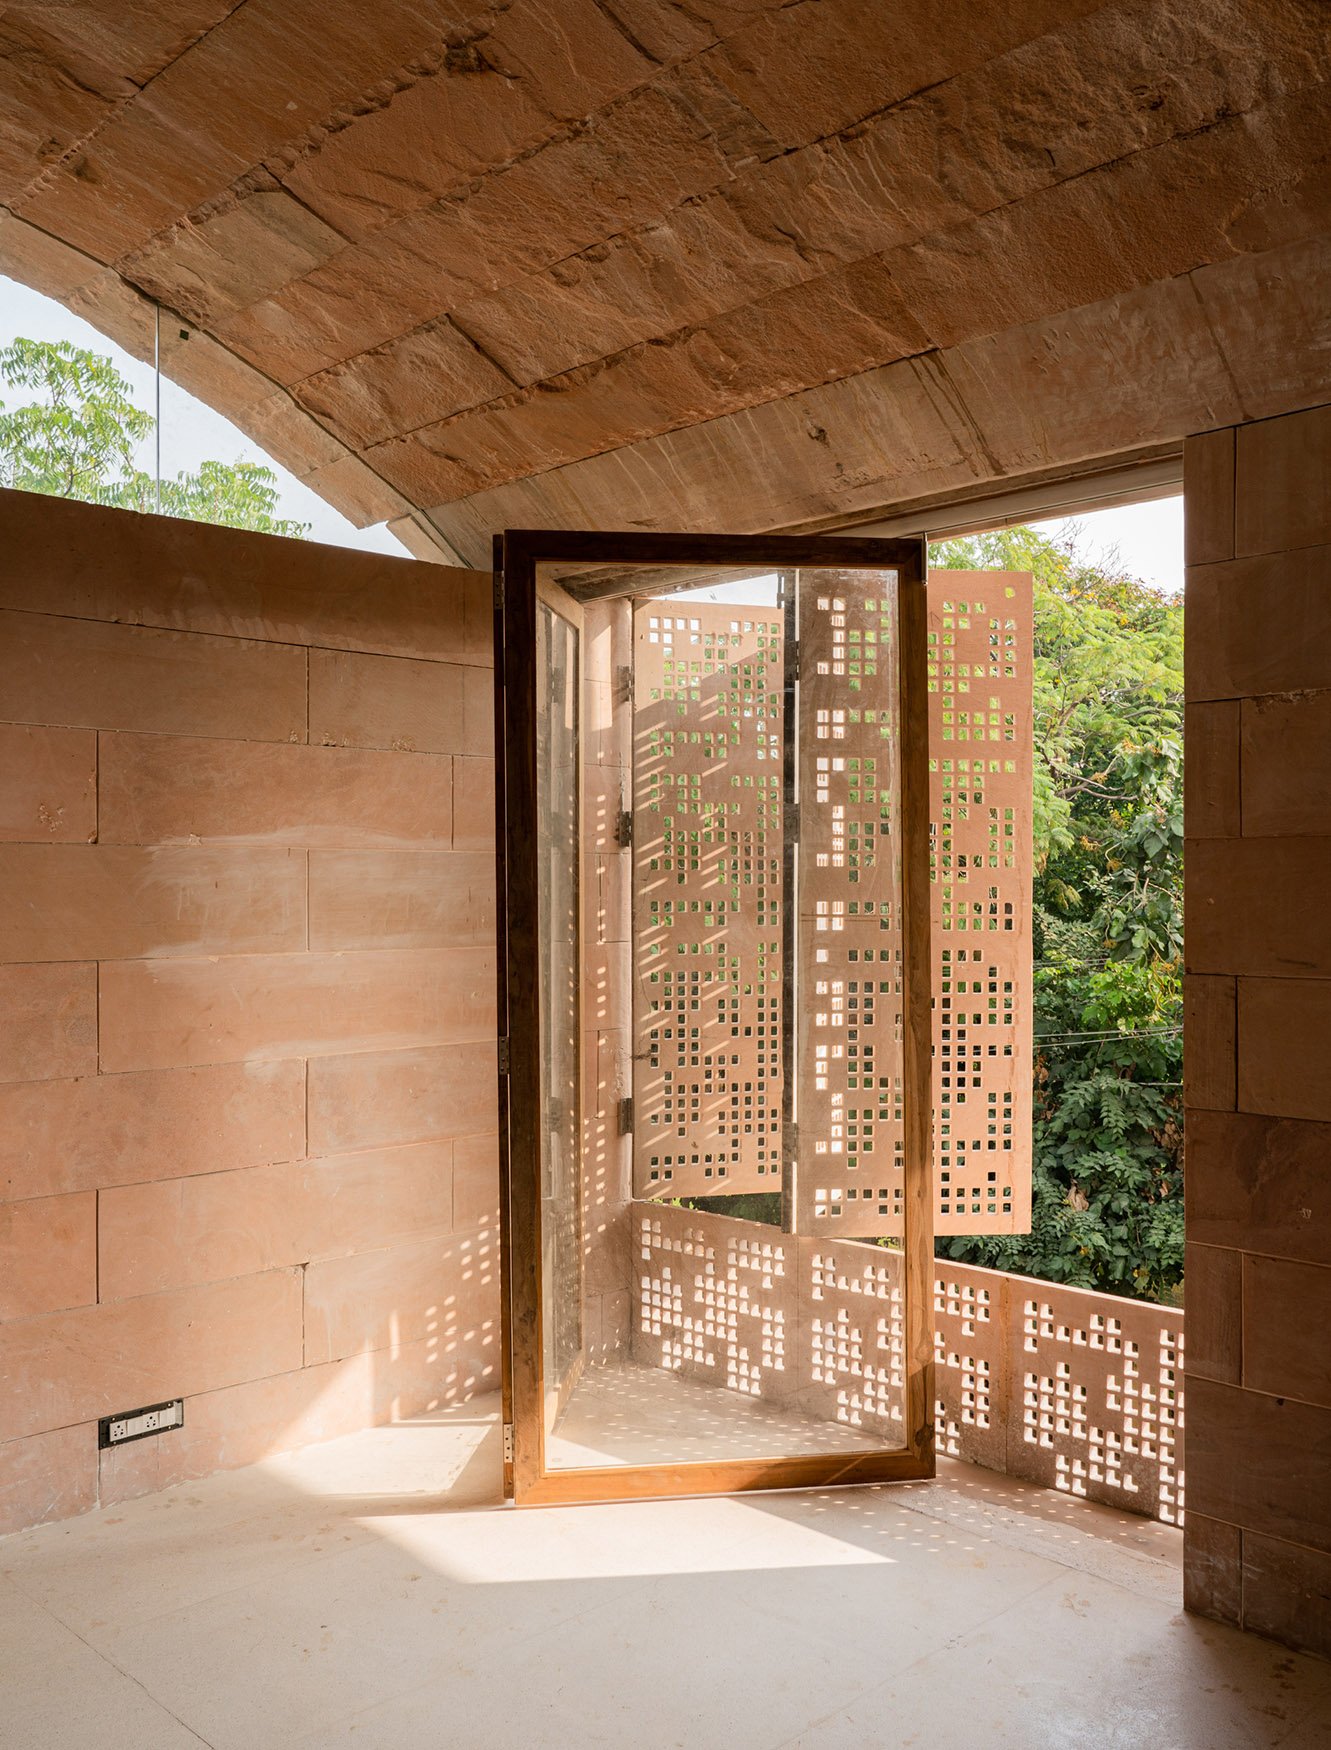 The light into the living and sleeping spaces is controlled through the operation of hand-crafted stone screens ( Jaalis). The naturally textured weight of the compression vaults amplifies the ethereal lig Fabien Charuau